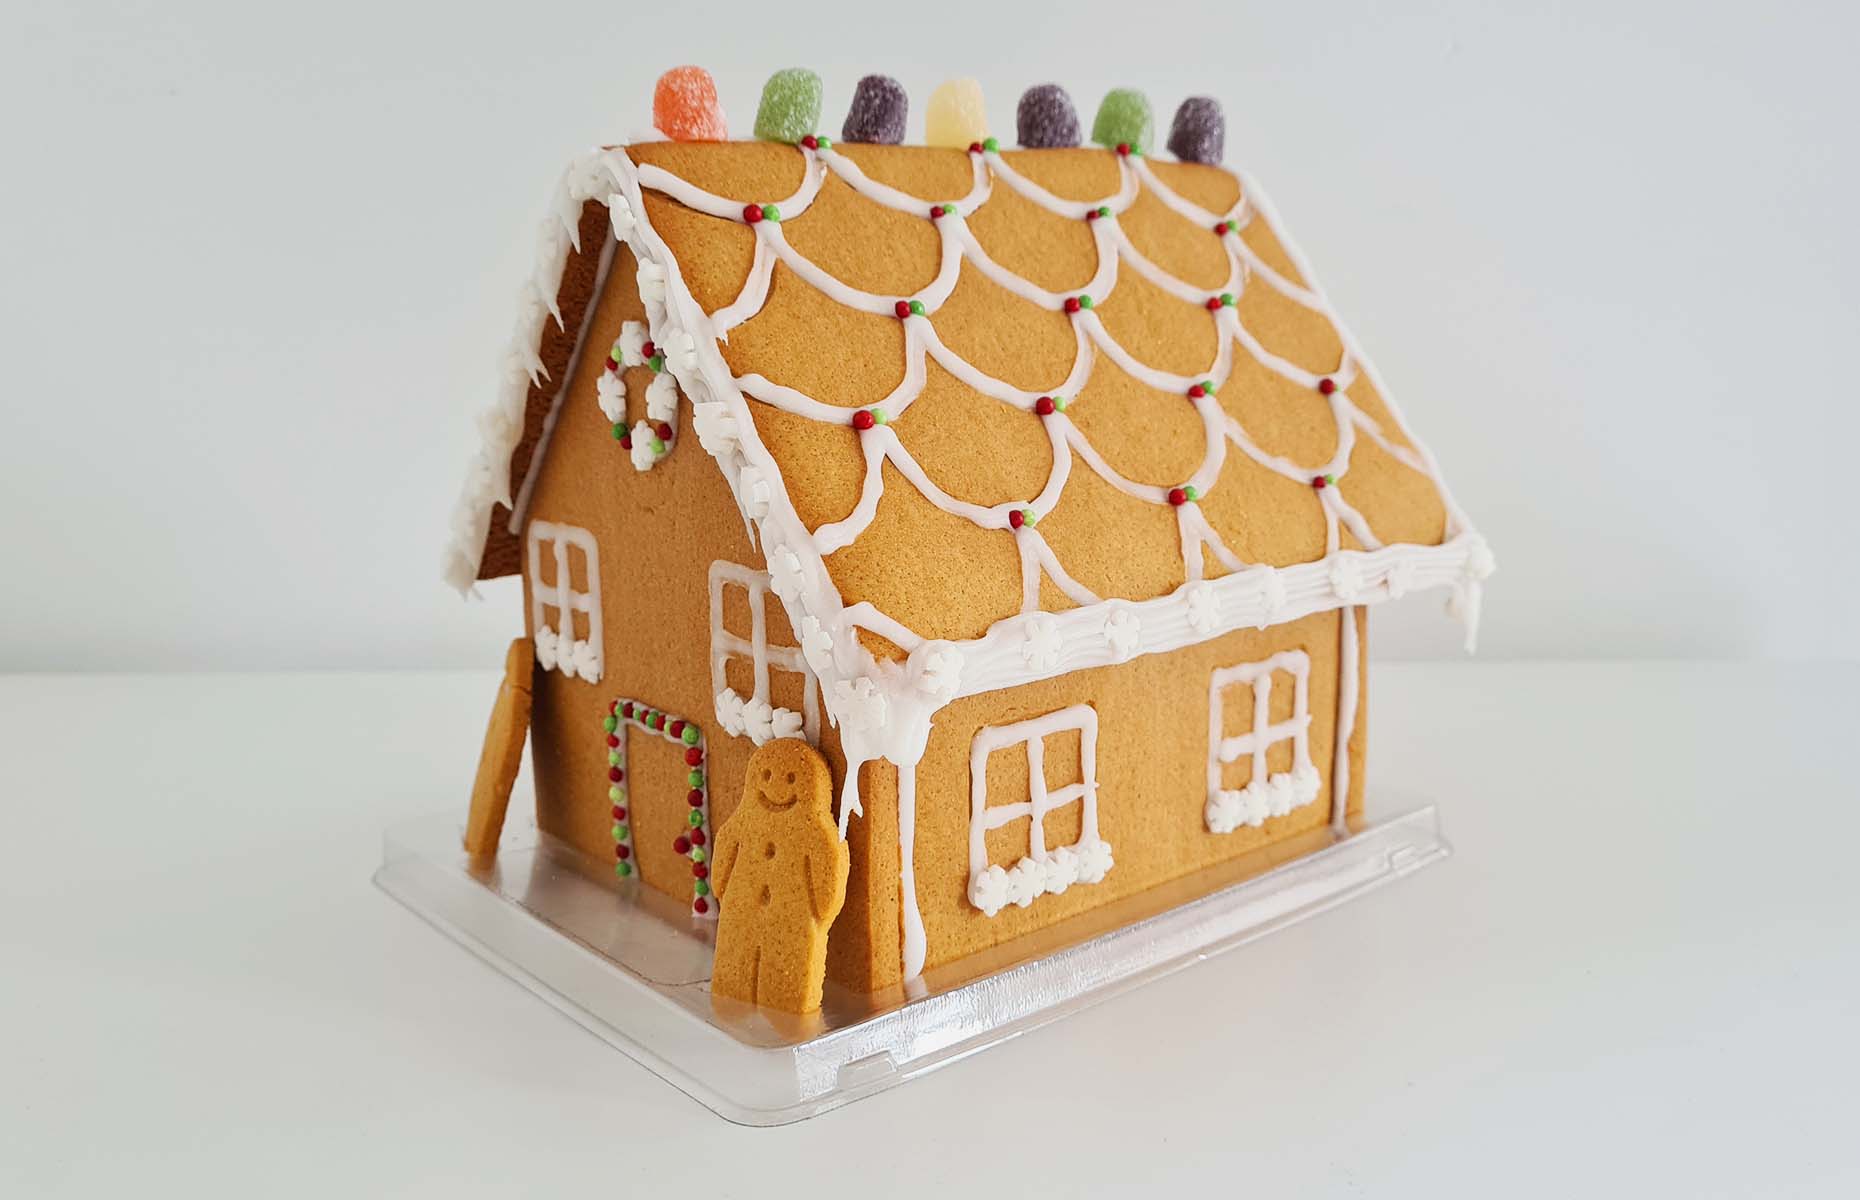 M&S gingerbread house finished 2021